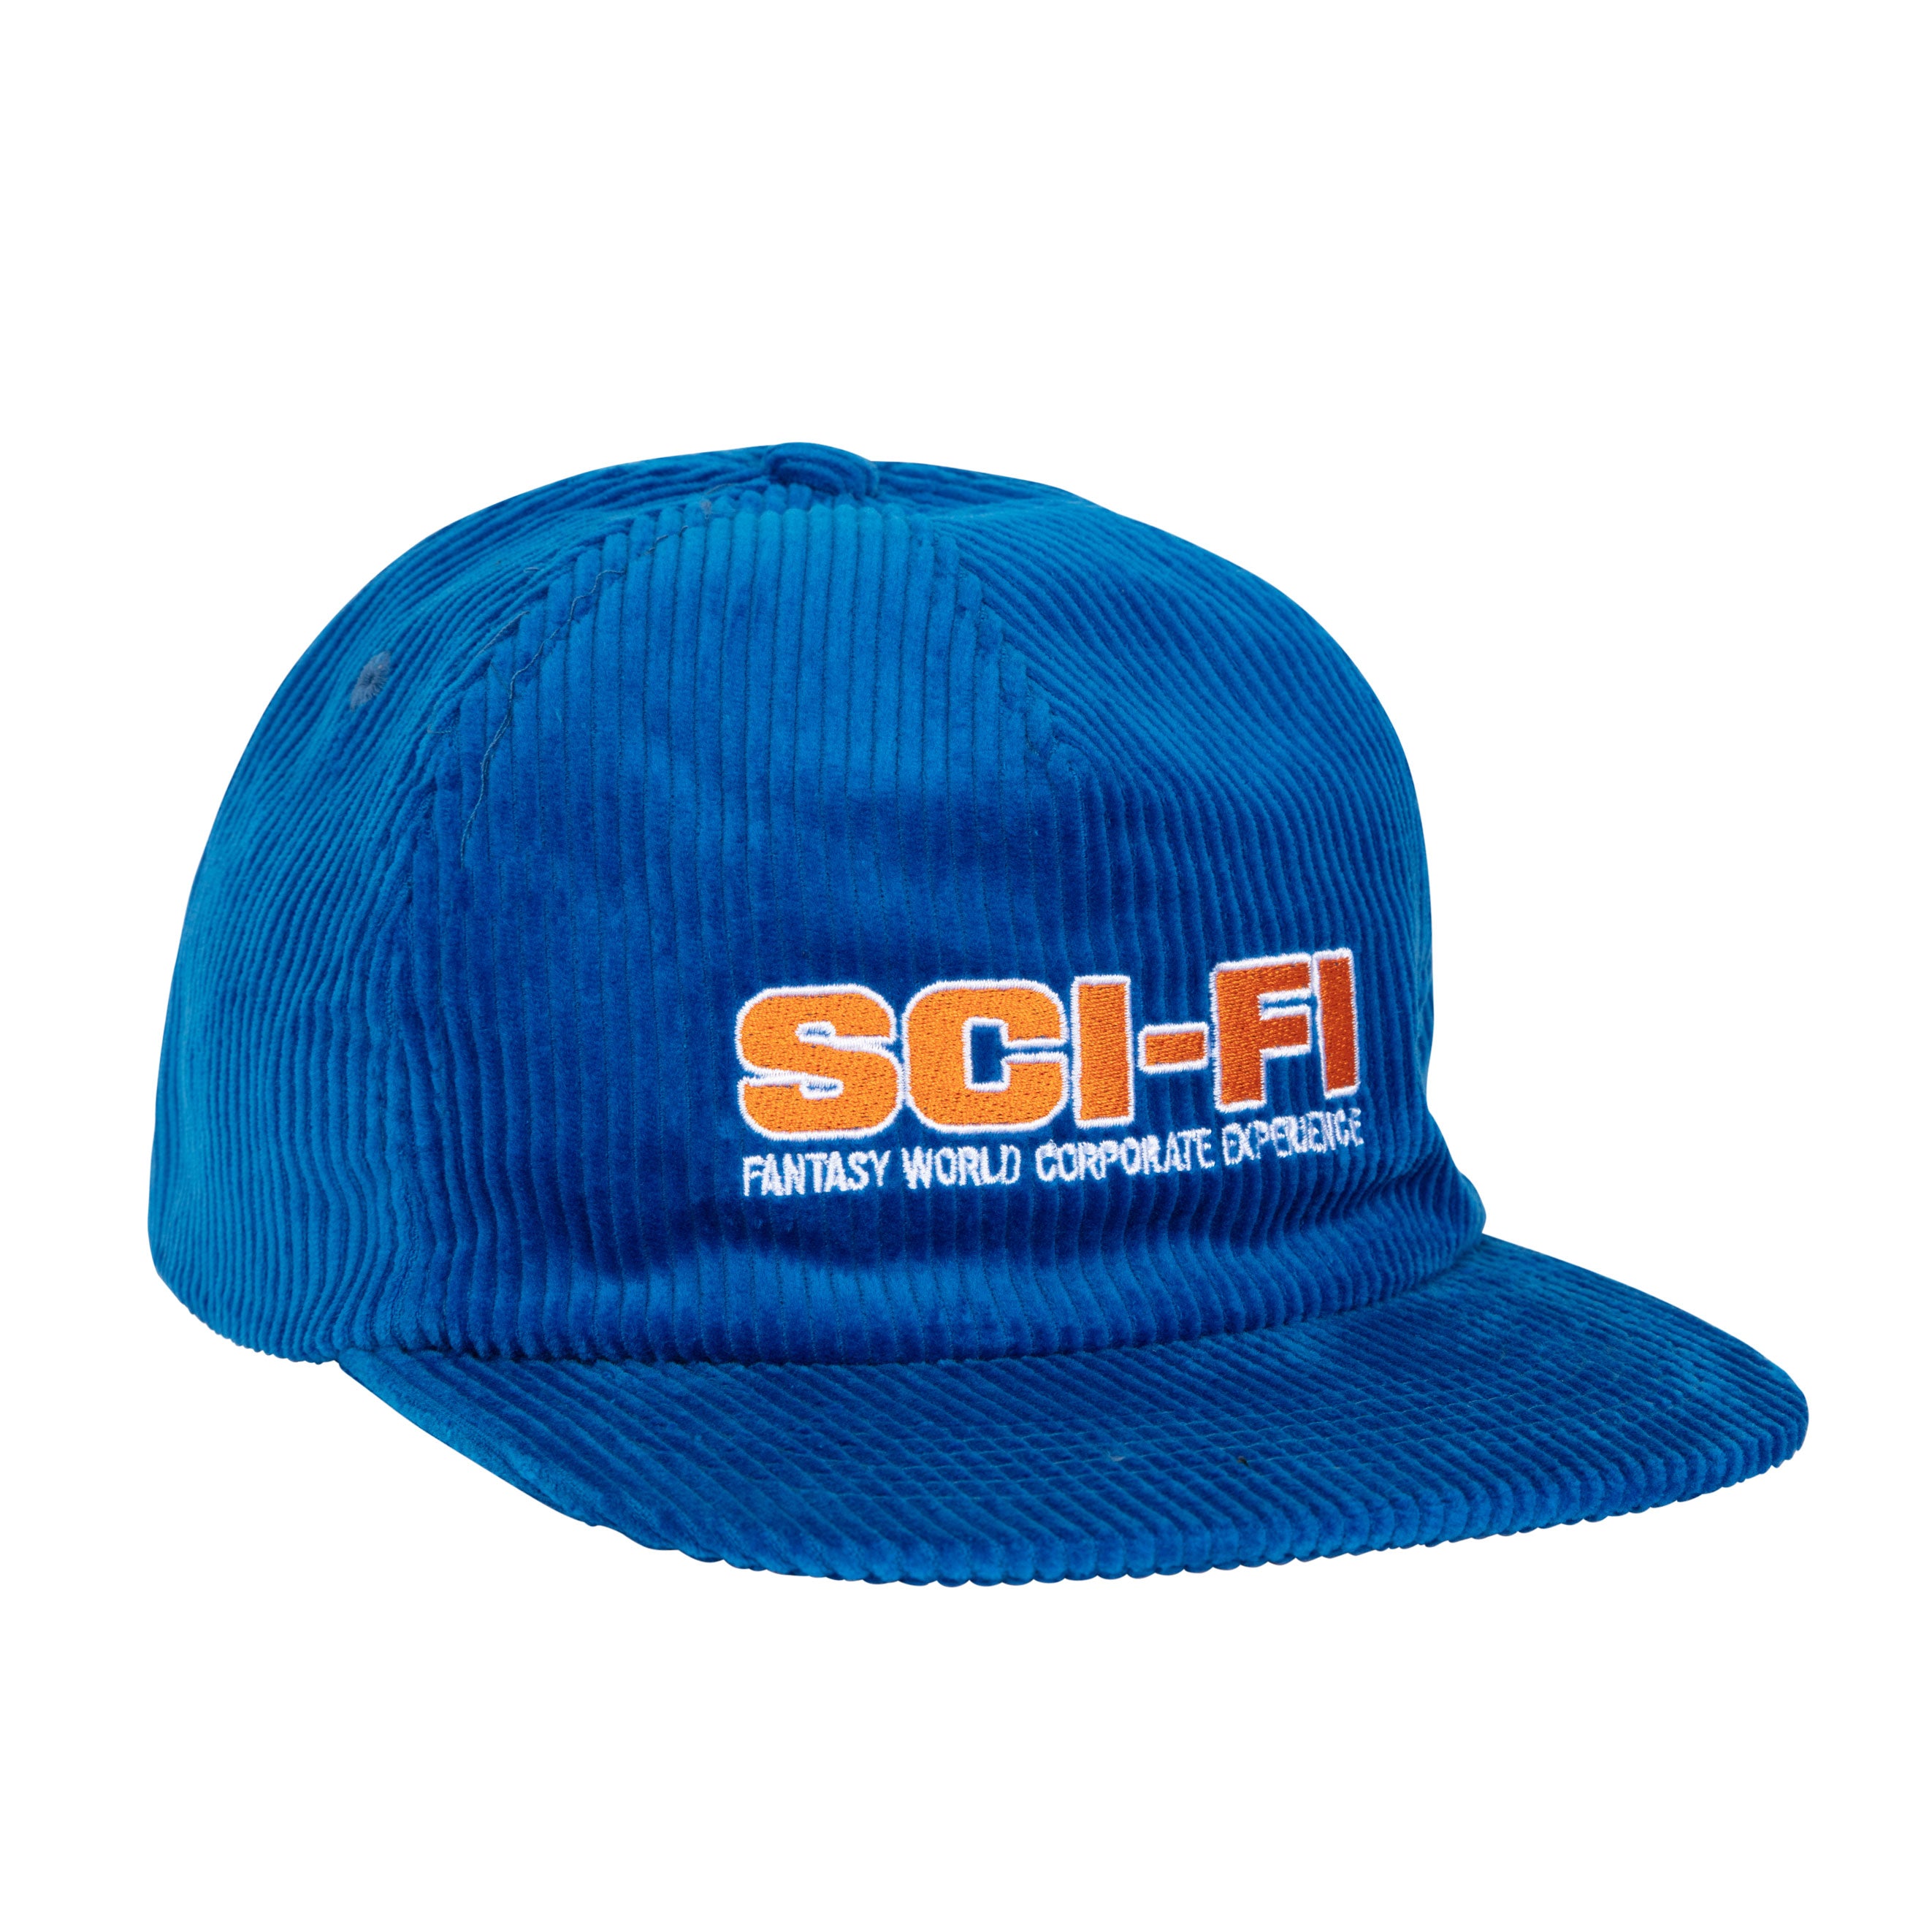 Corporate Experience Hat - Blue